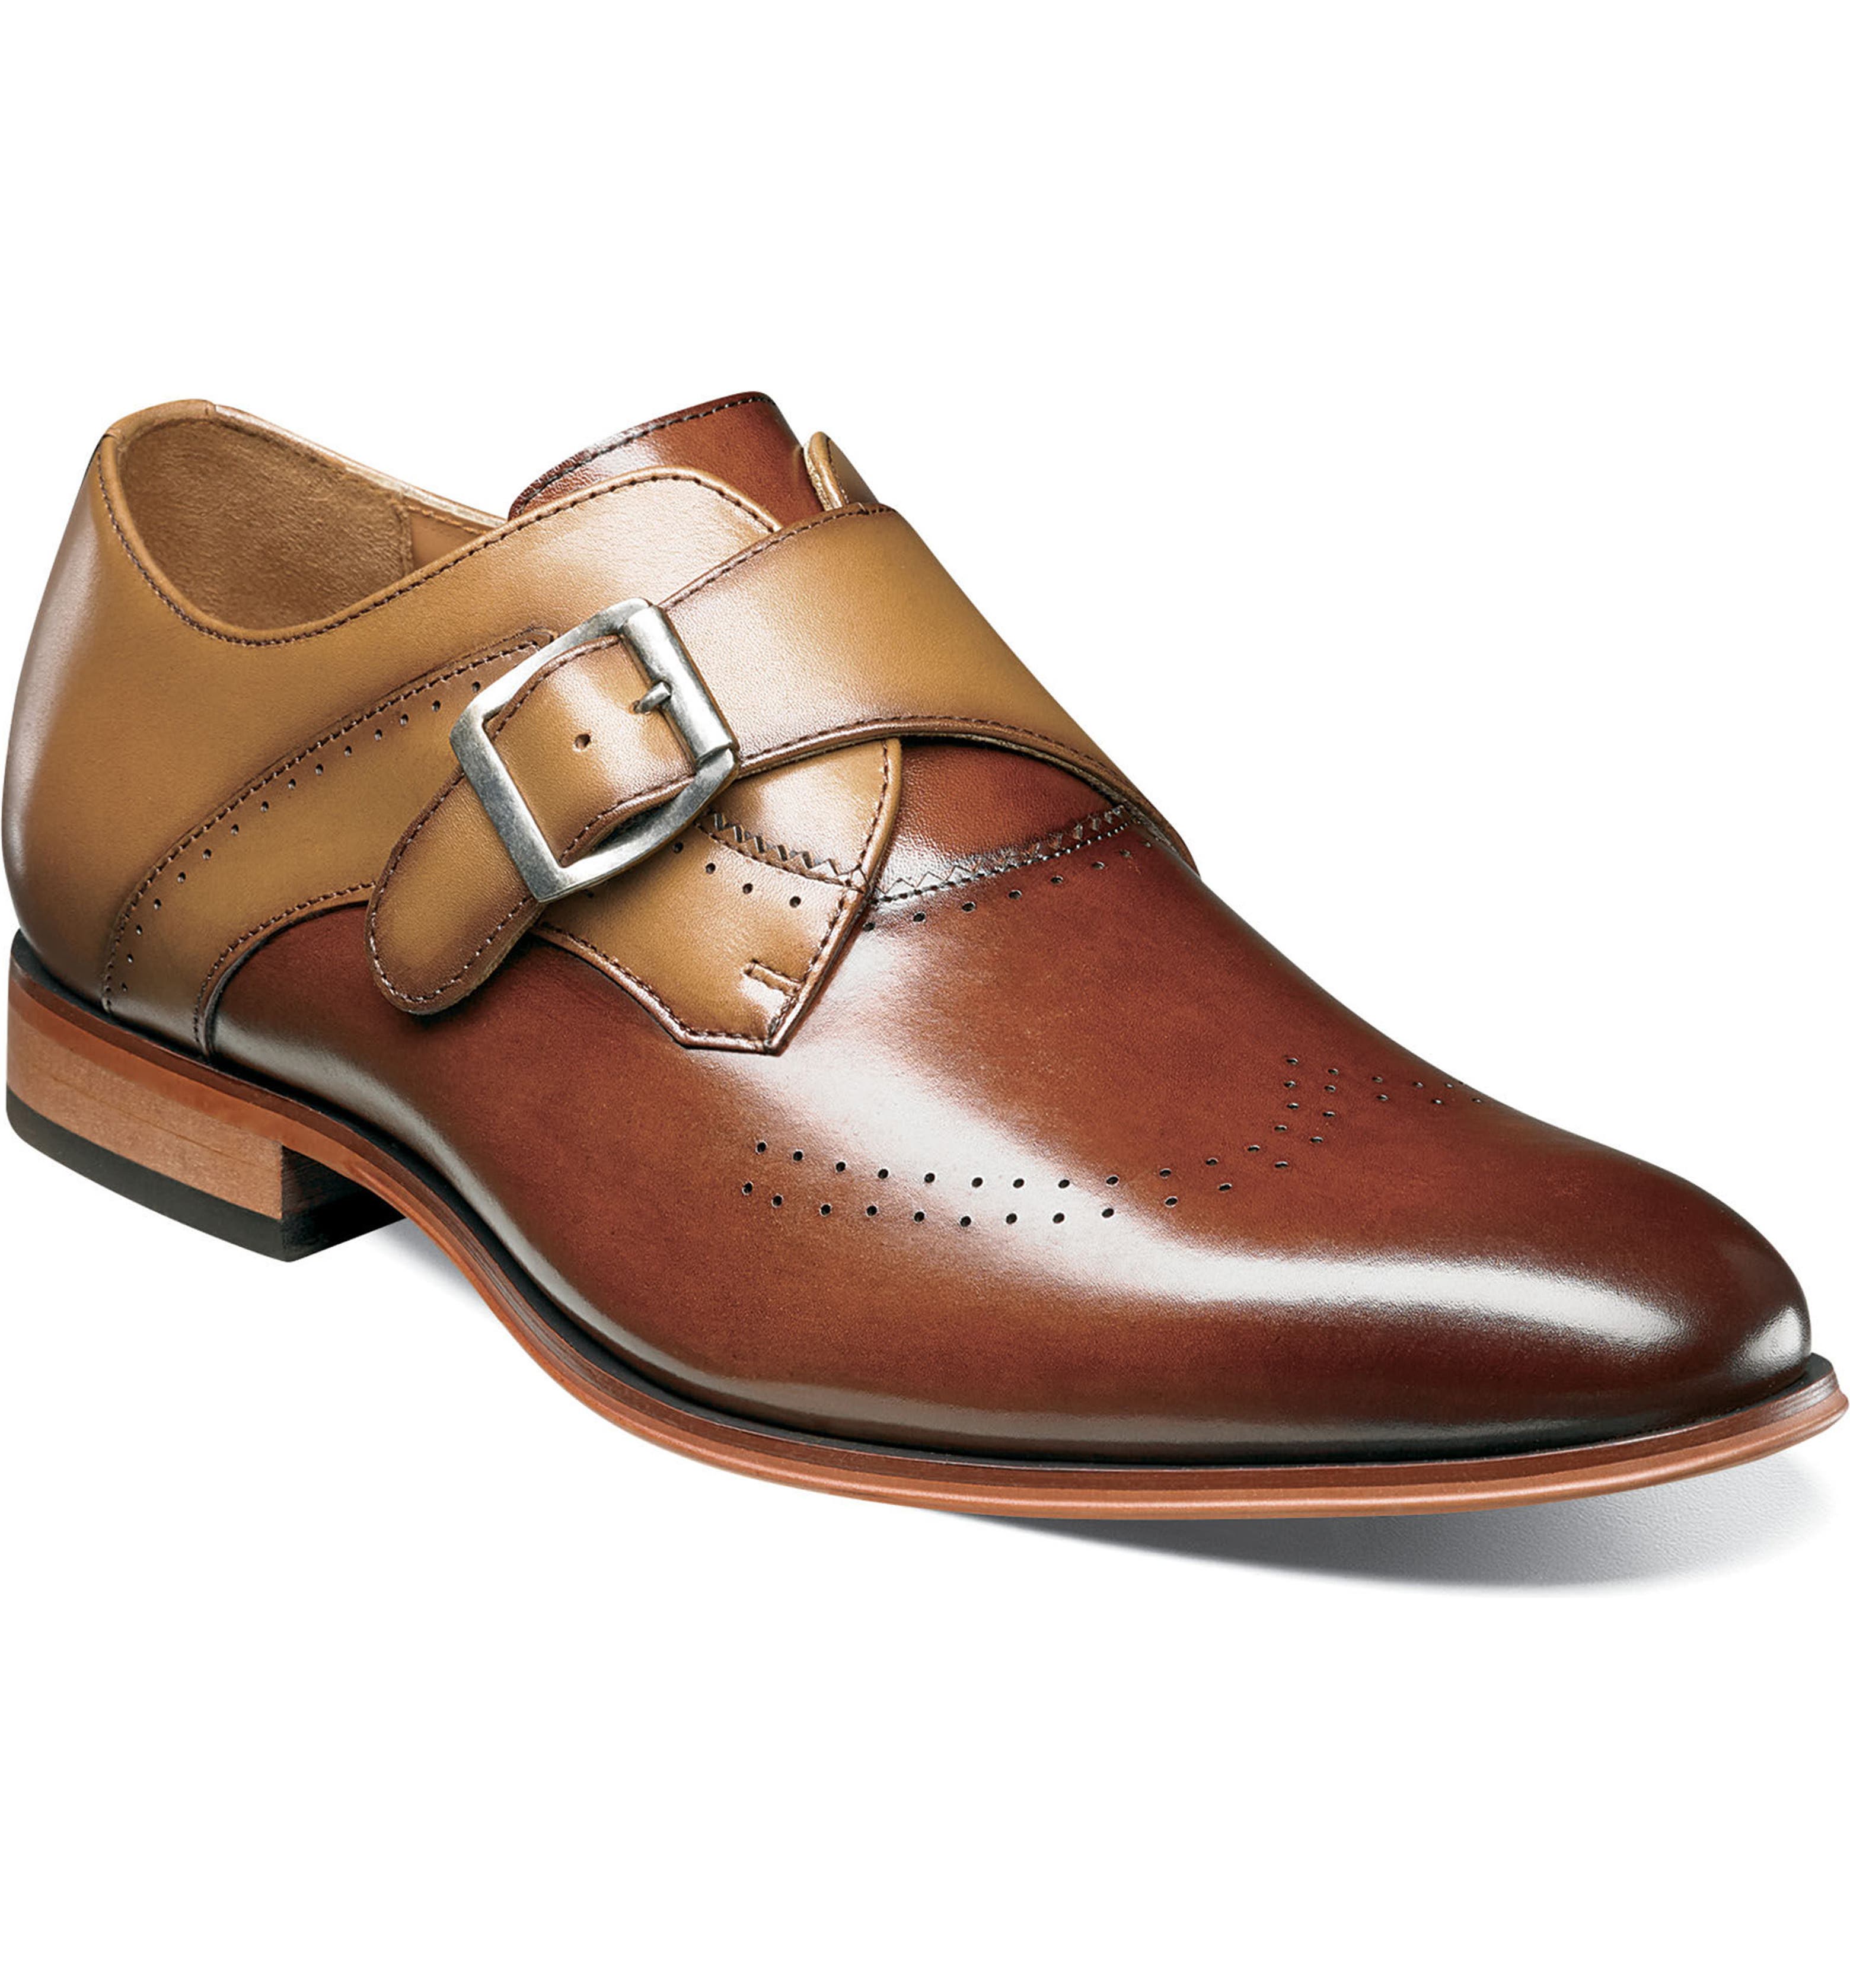 Stacy Adams Saxton Perforated Monk Strap Shoe (Men) | Nordstrom